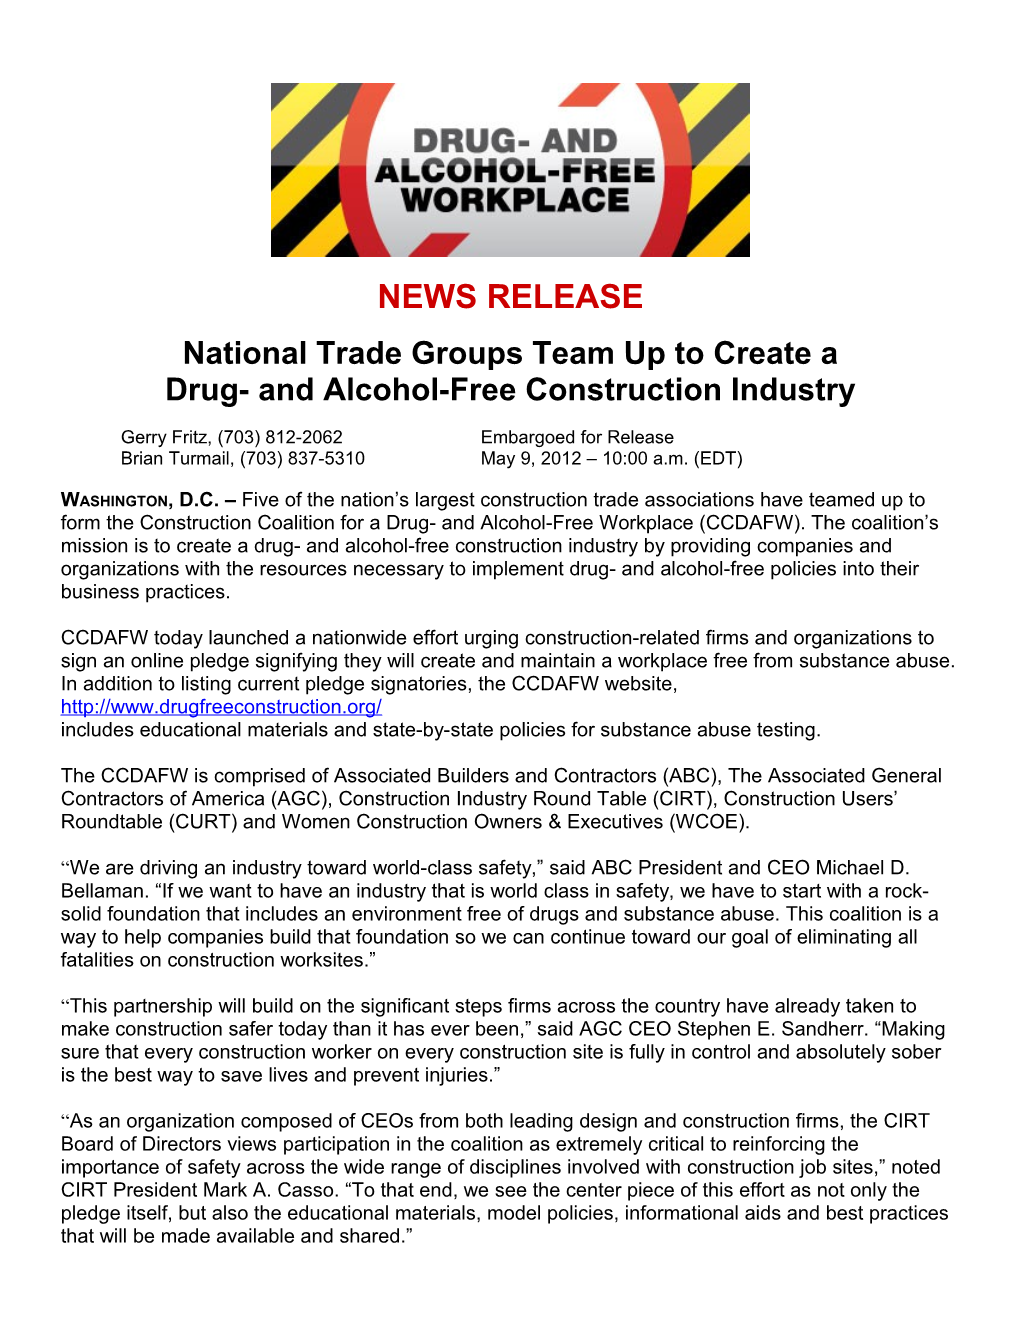 National Trade Groups Team up to Create A